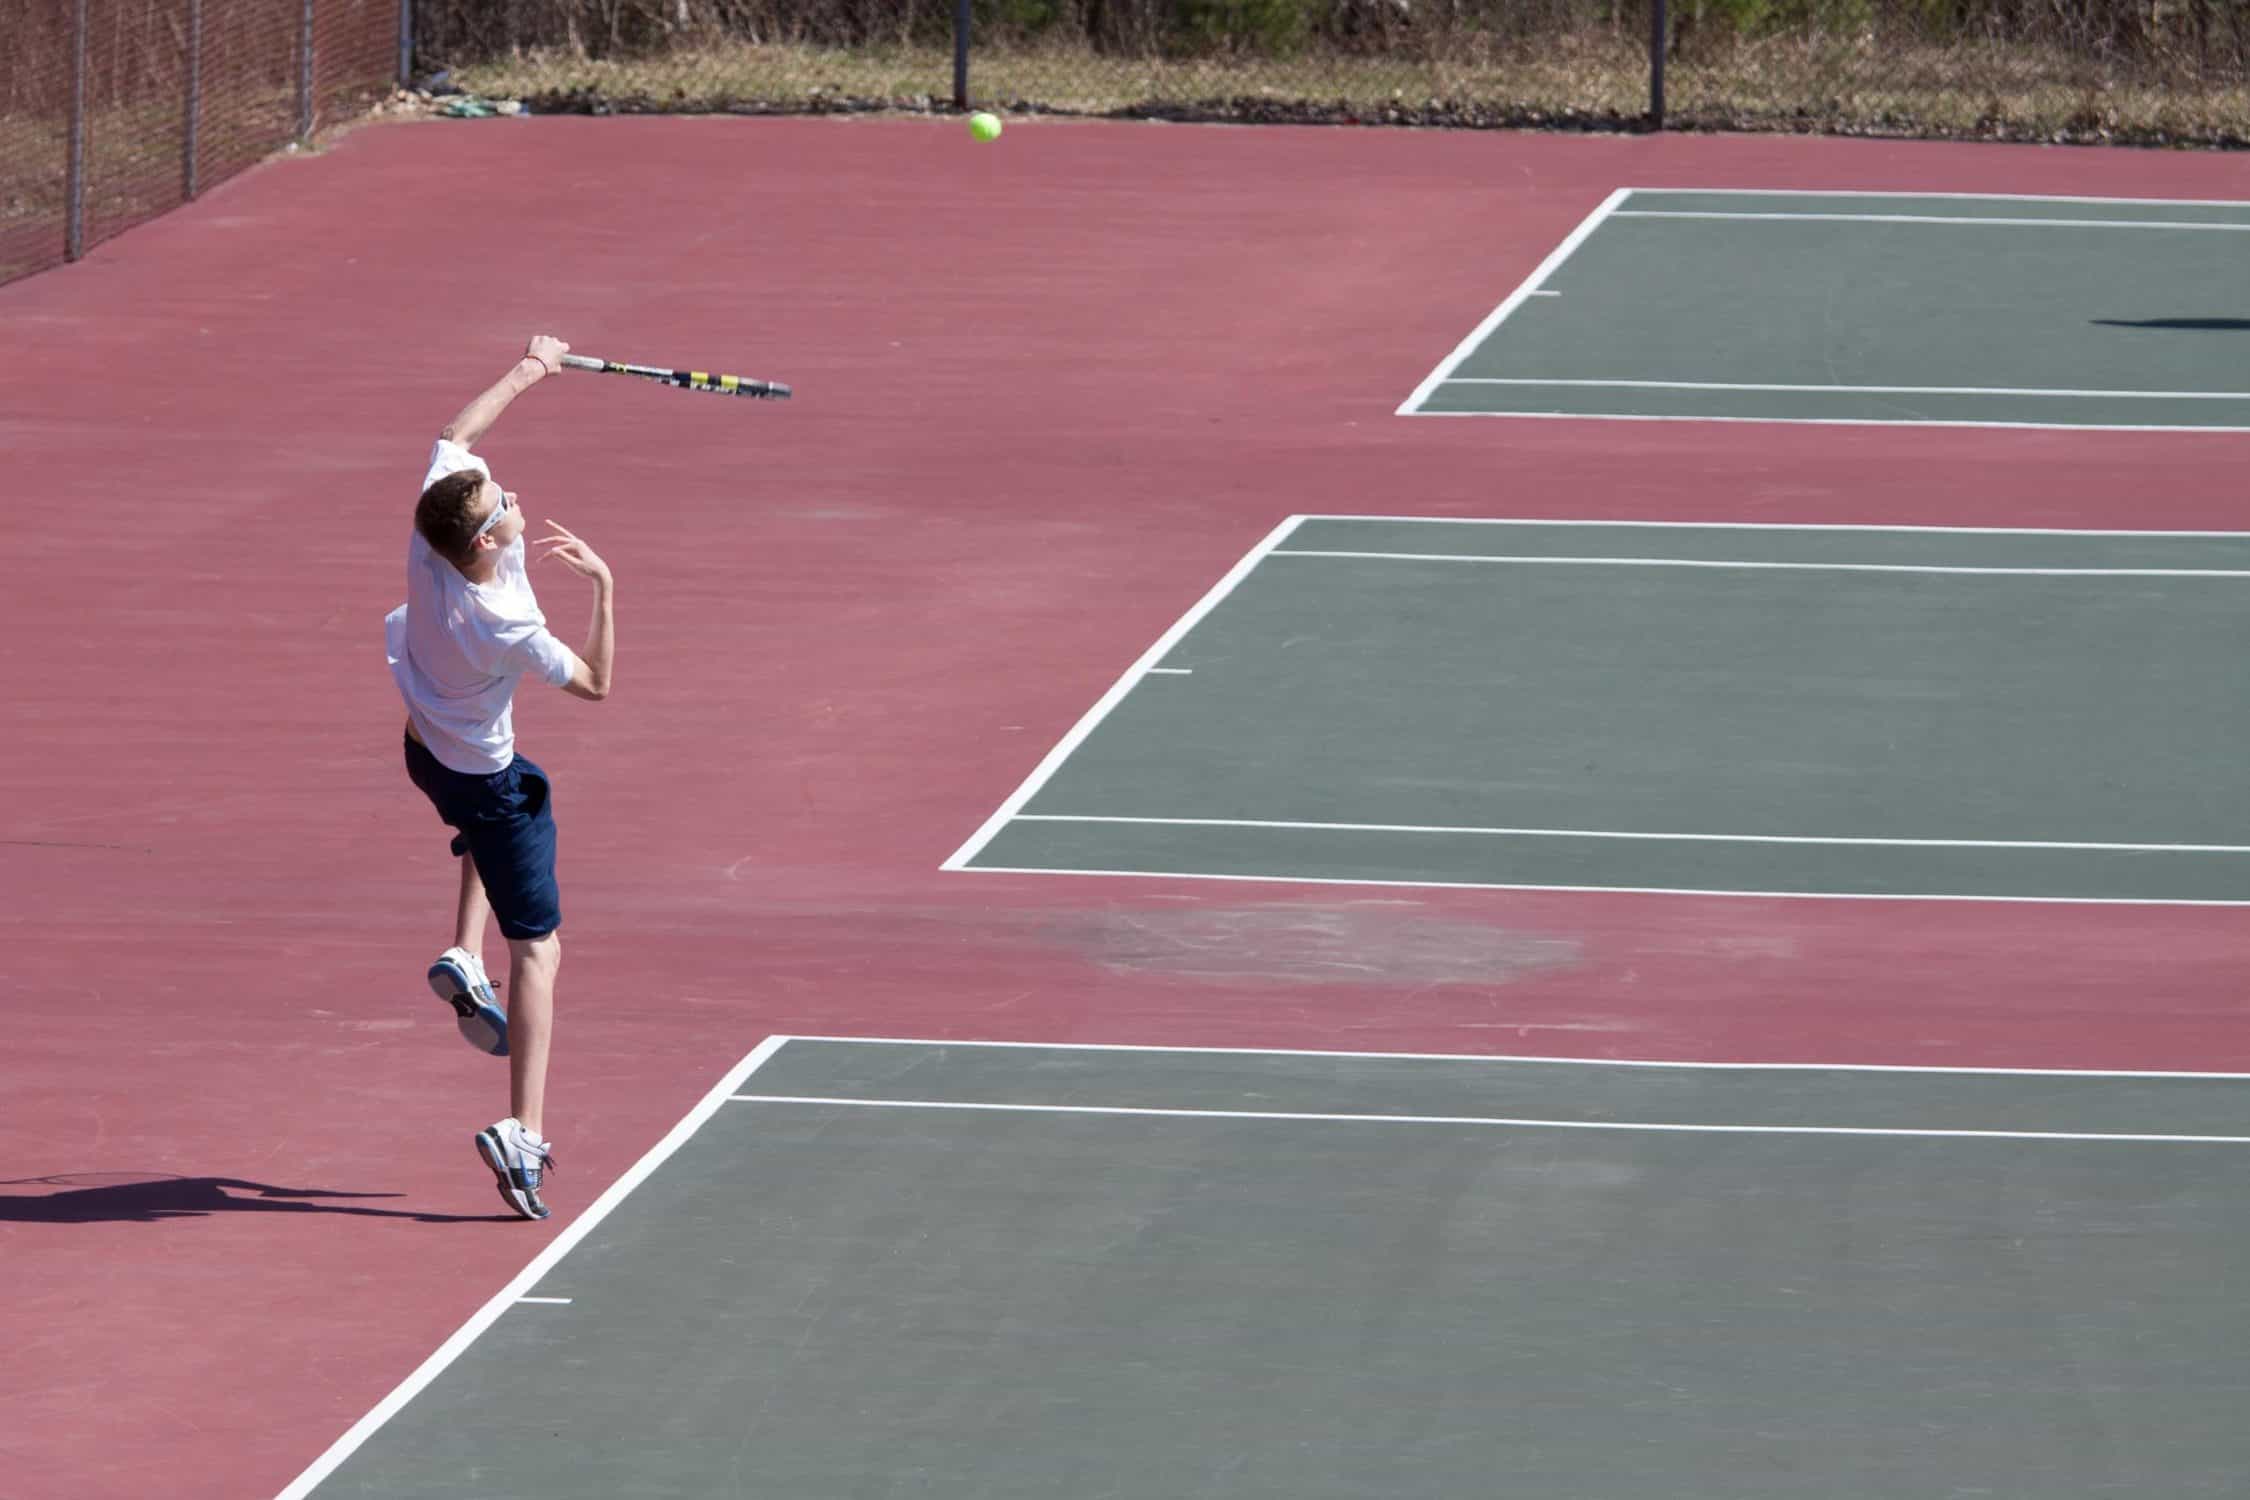 Player on the tennis court